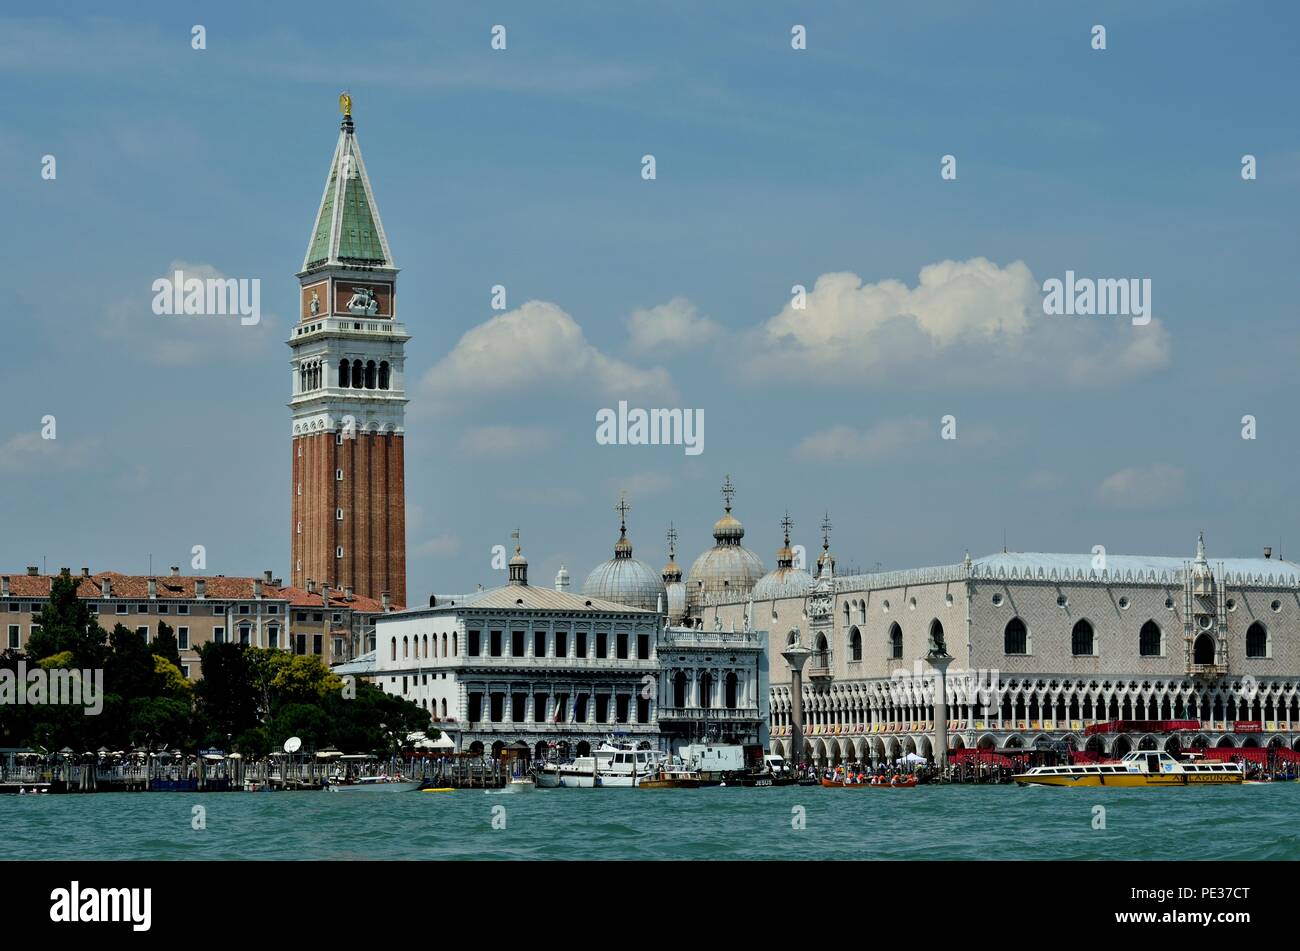 A lot of tourists enjoying siteseeing at The Doge's Palace at right and the Campanile Tower in the left in St Mark's Square, Venice, Italy, Europe Stock Photo